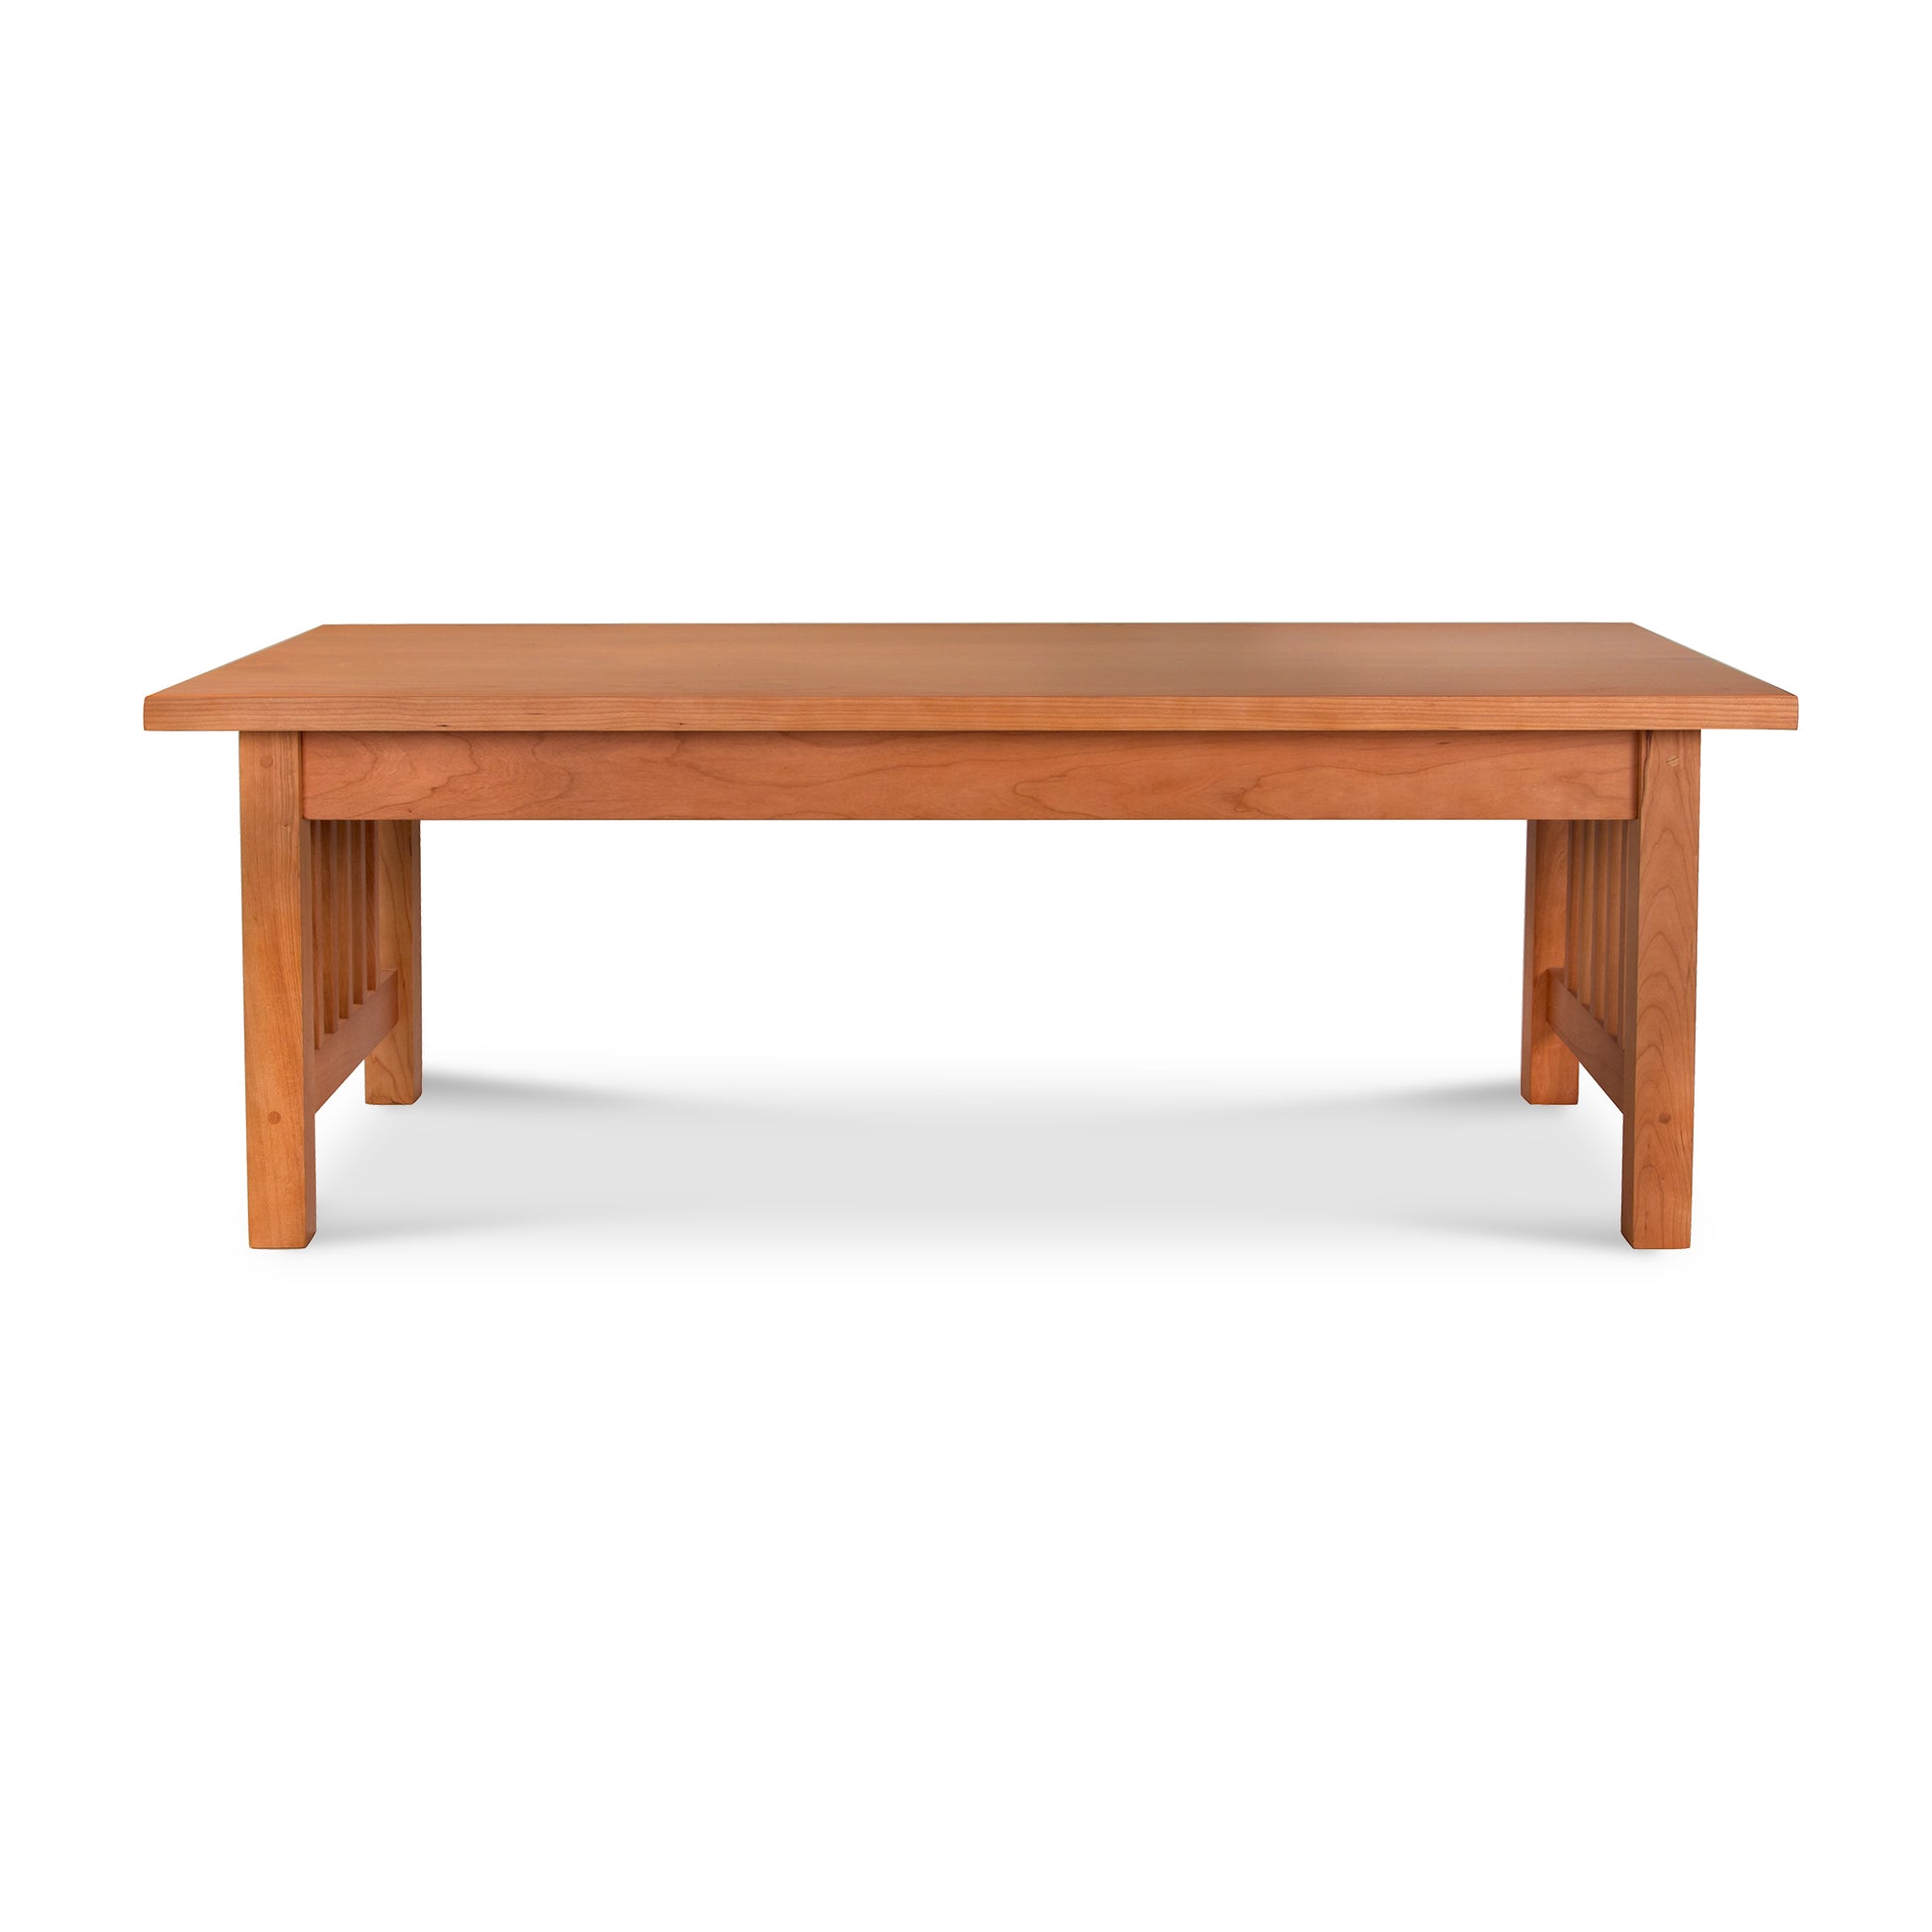 A handcrafted American-made American Mission Coffee Table with a wooden top on a white background by Lyndon Furniture.